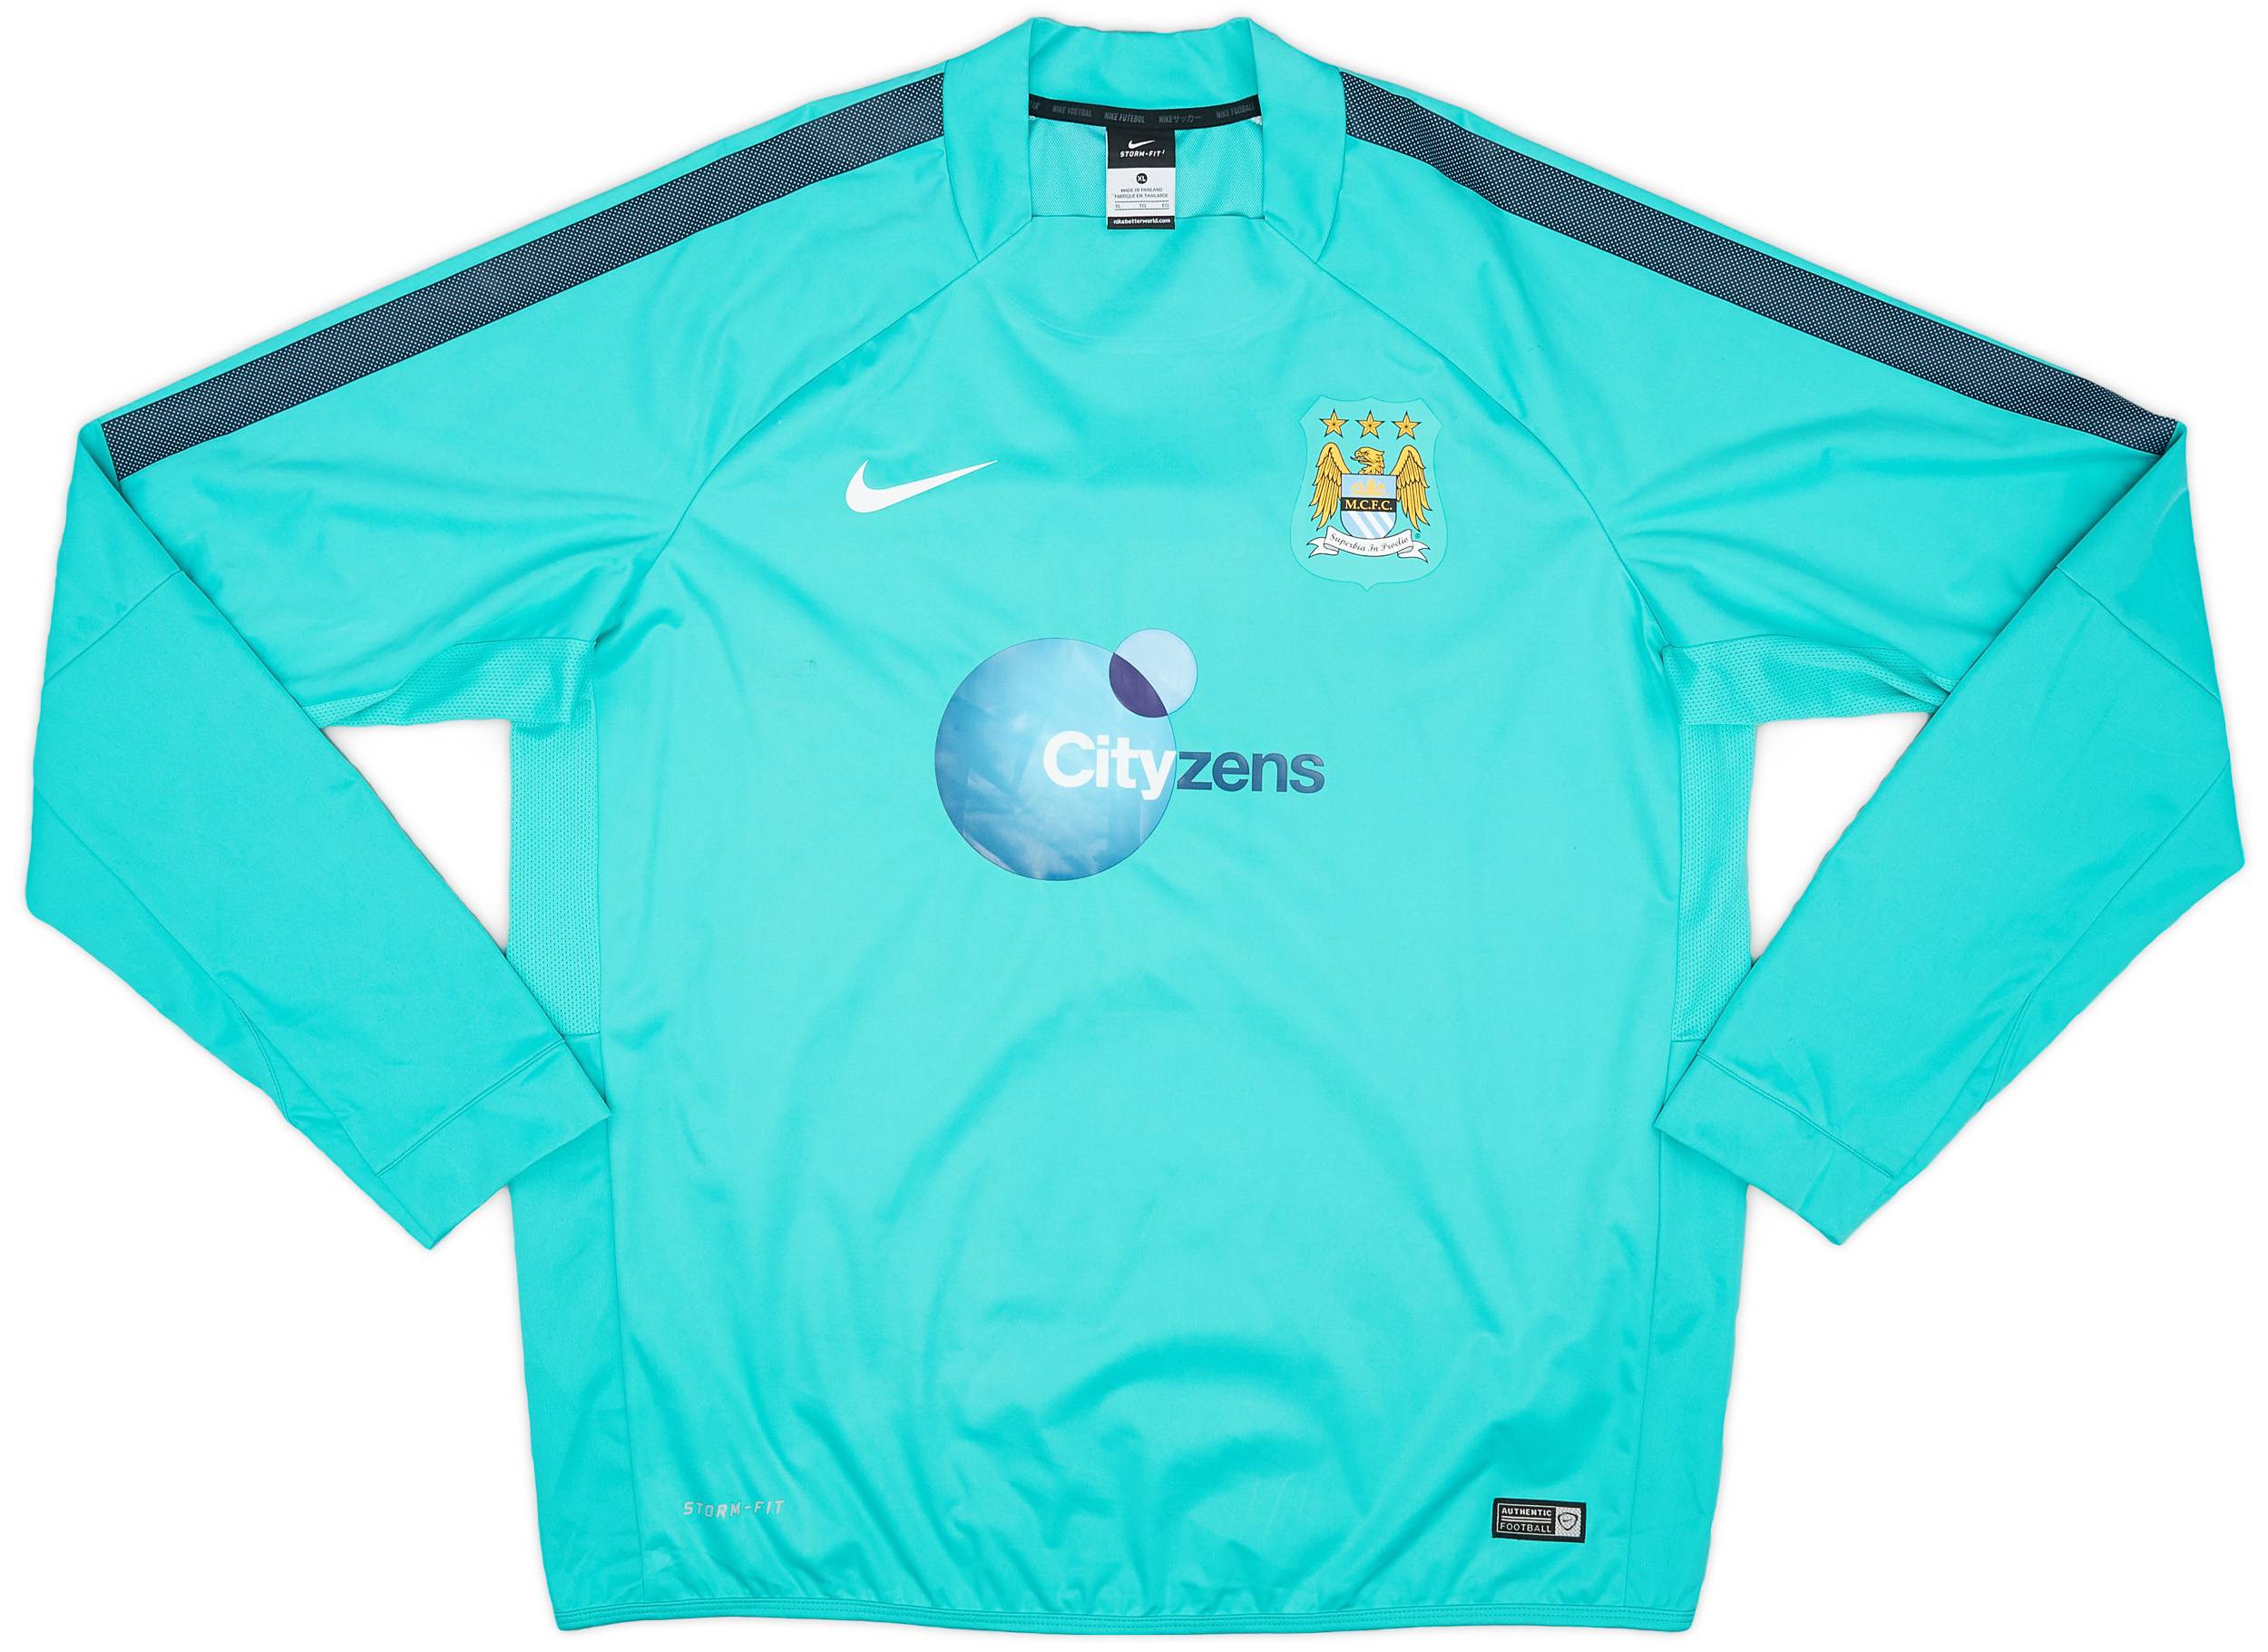 2015-16 Manchester City Nike Storm-Fit Drill Top - 9/10 - (XL)